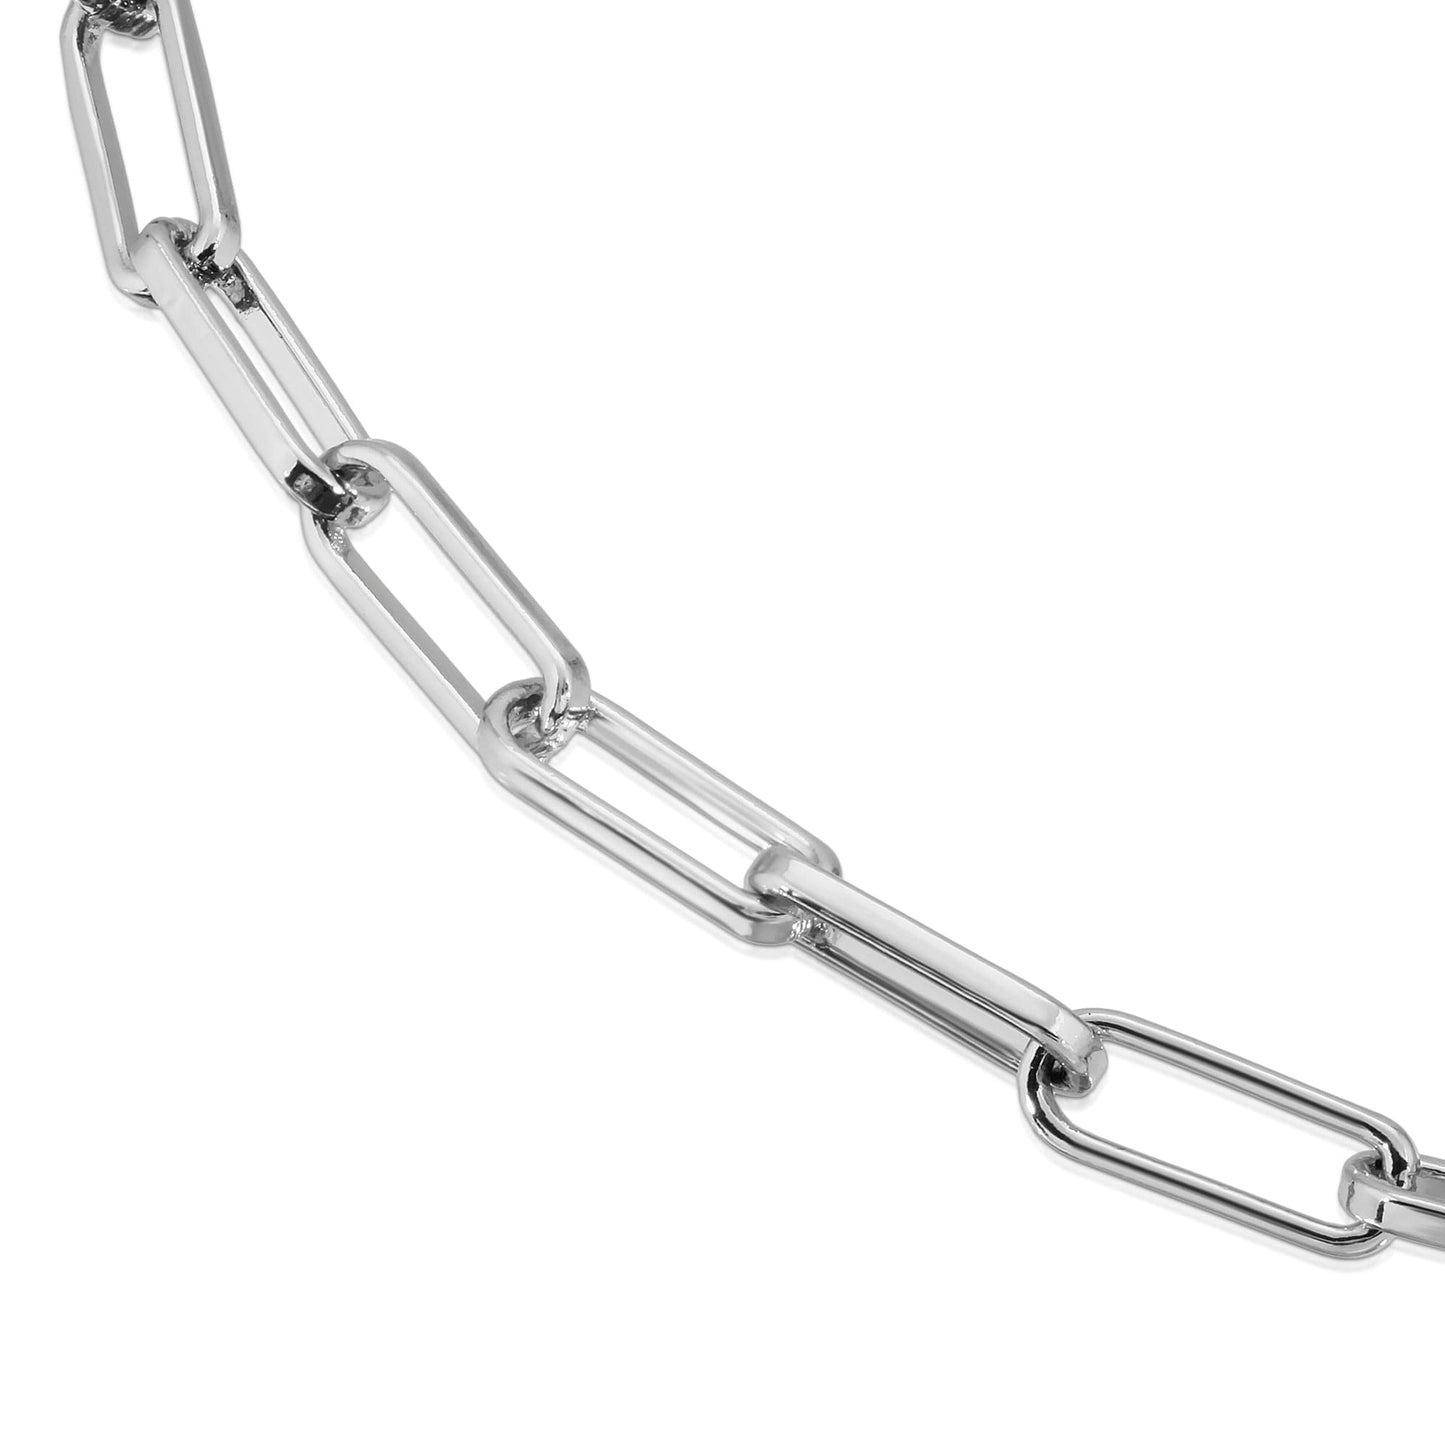 3.4mm Elongated Link Silver Chain Anklet